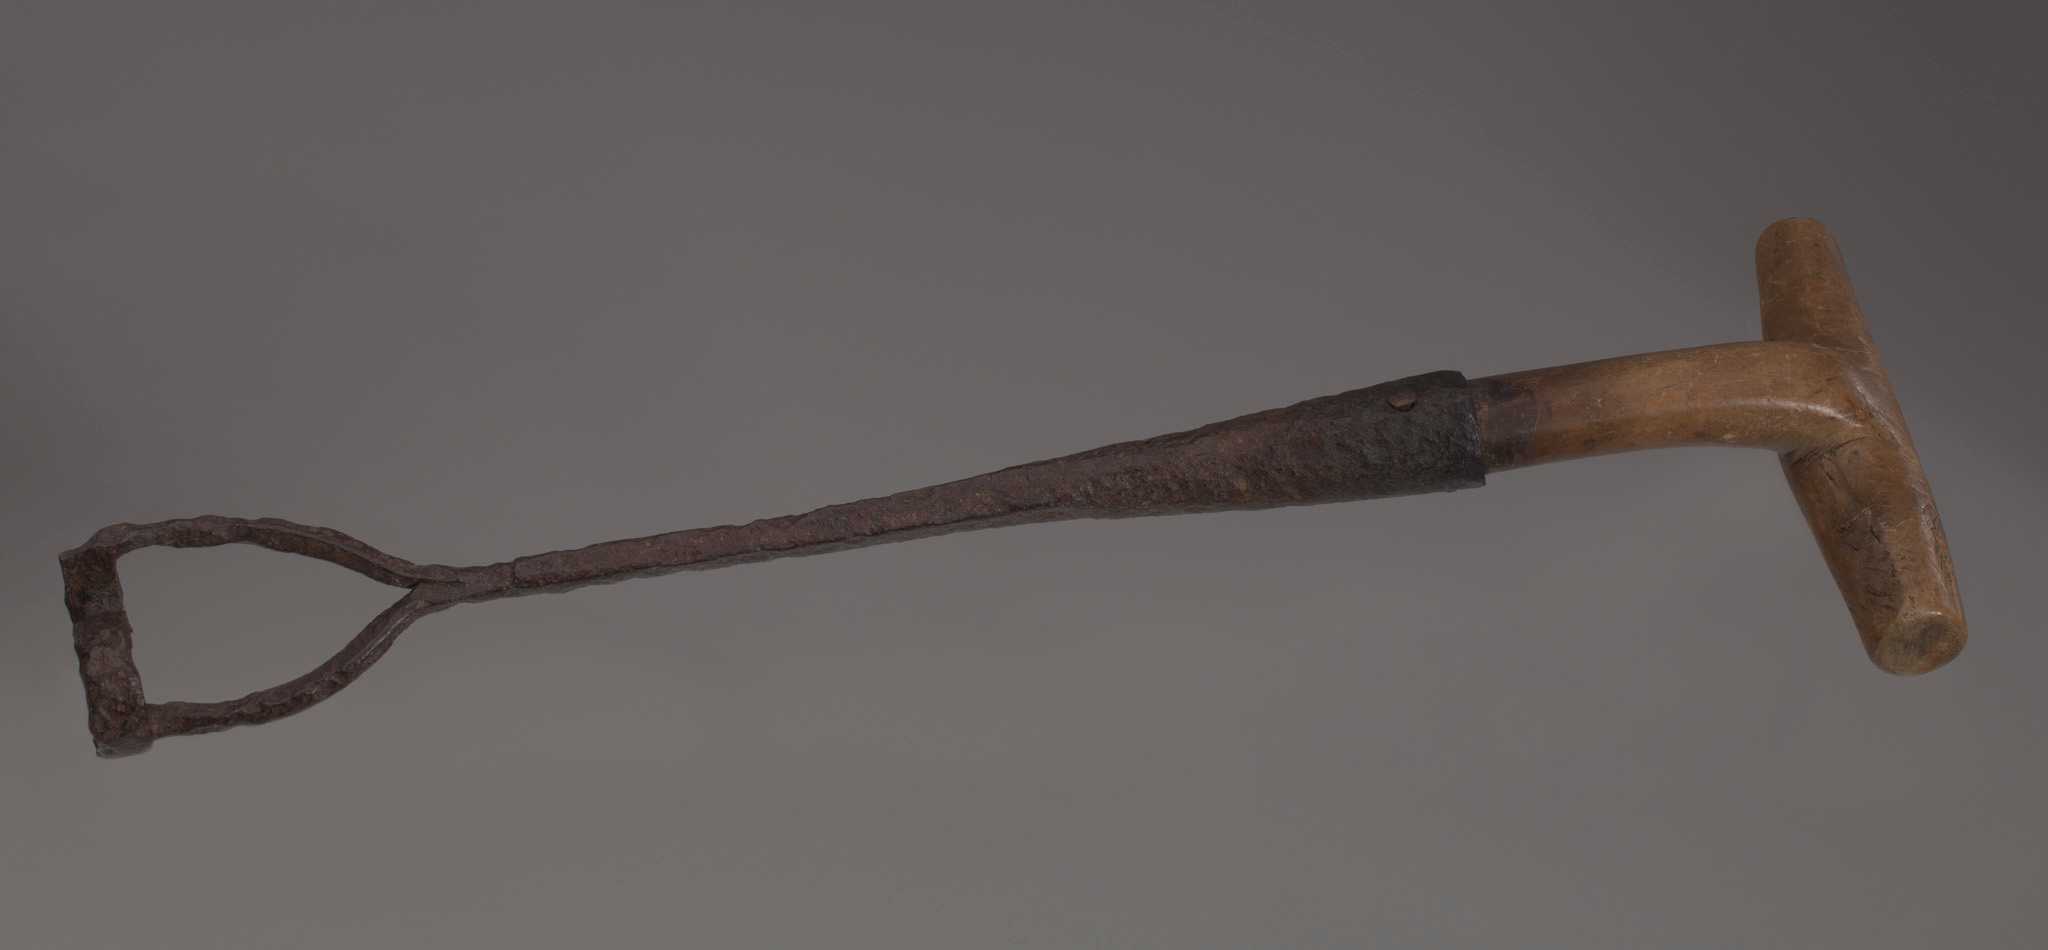 Slave branding iron with "S" head. Branding iron has a "T" shaped wood handle, attached to brand using a nail. Iron brand is cylindrical and breaks in to two prongs that attach to the top and bottom of the "S" head.